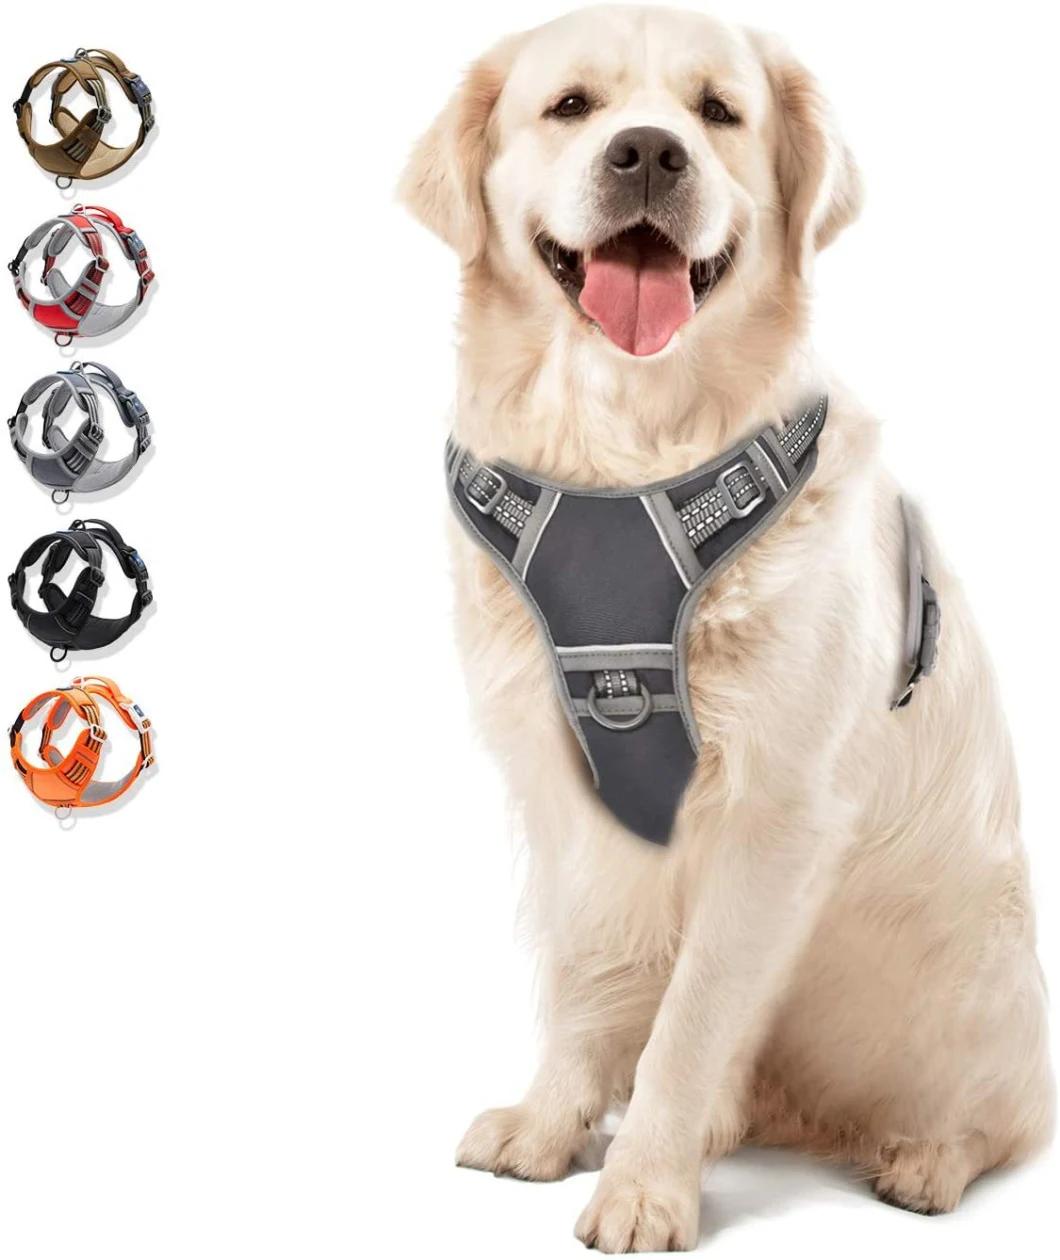 Adjustable Lightweight Portable Air Mesh No Pull Dog Harness Pet Accessories